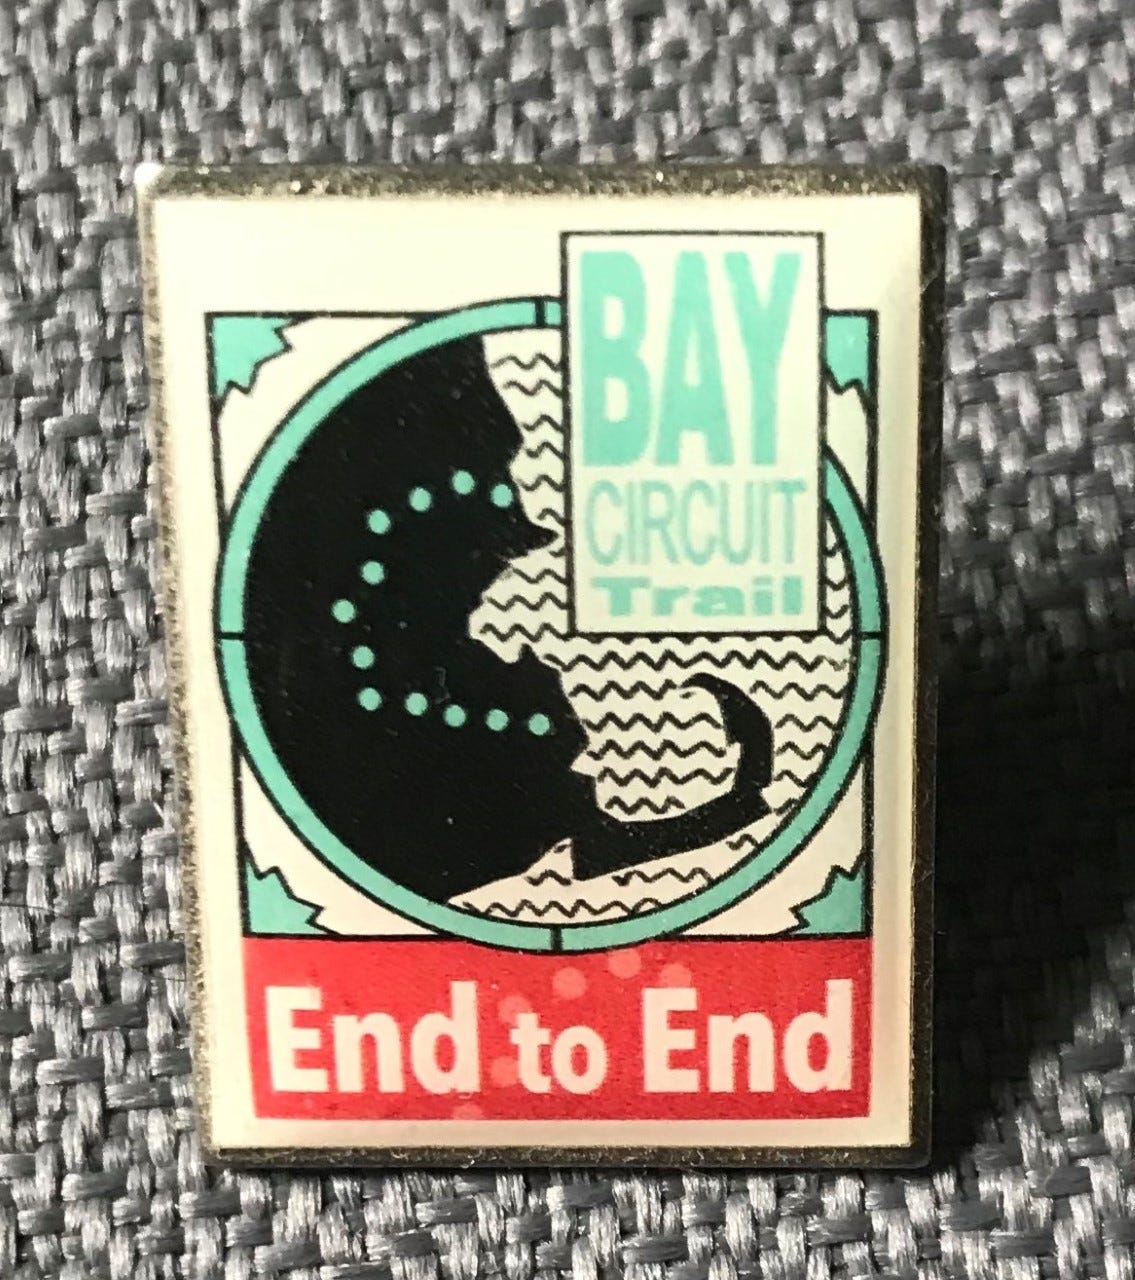 End-to-end hikers of the Bay Circuit Trail are rewarded with a commemorative pin.